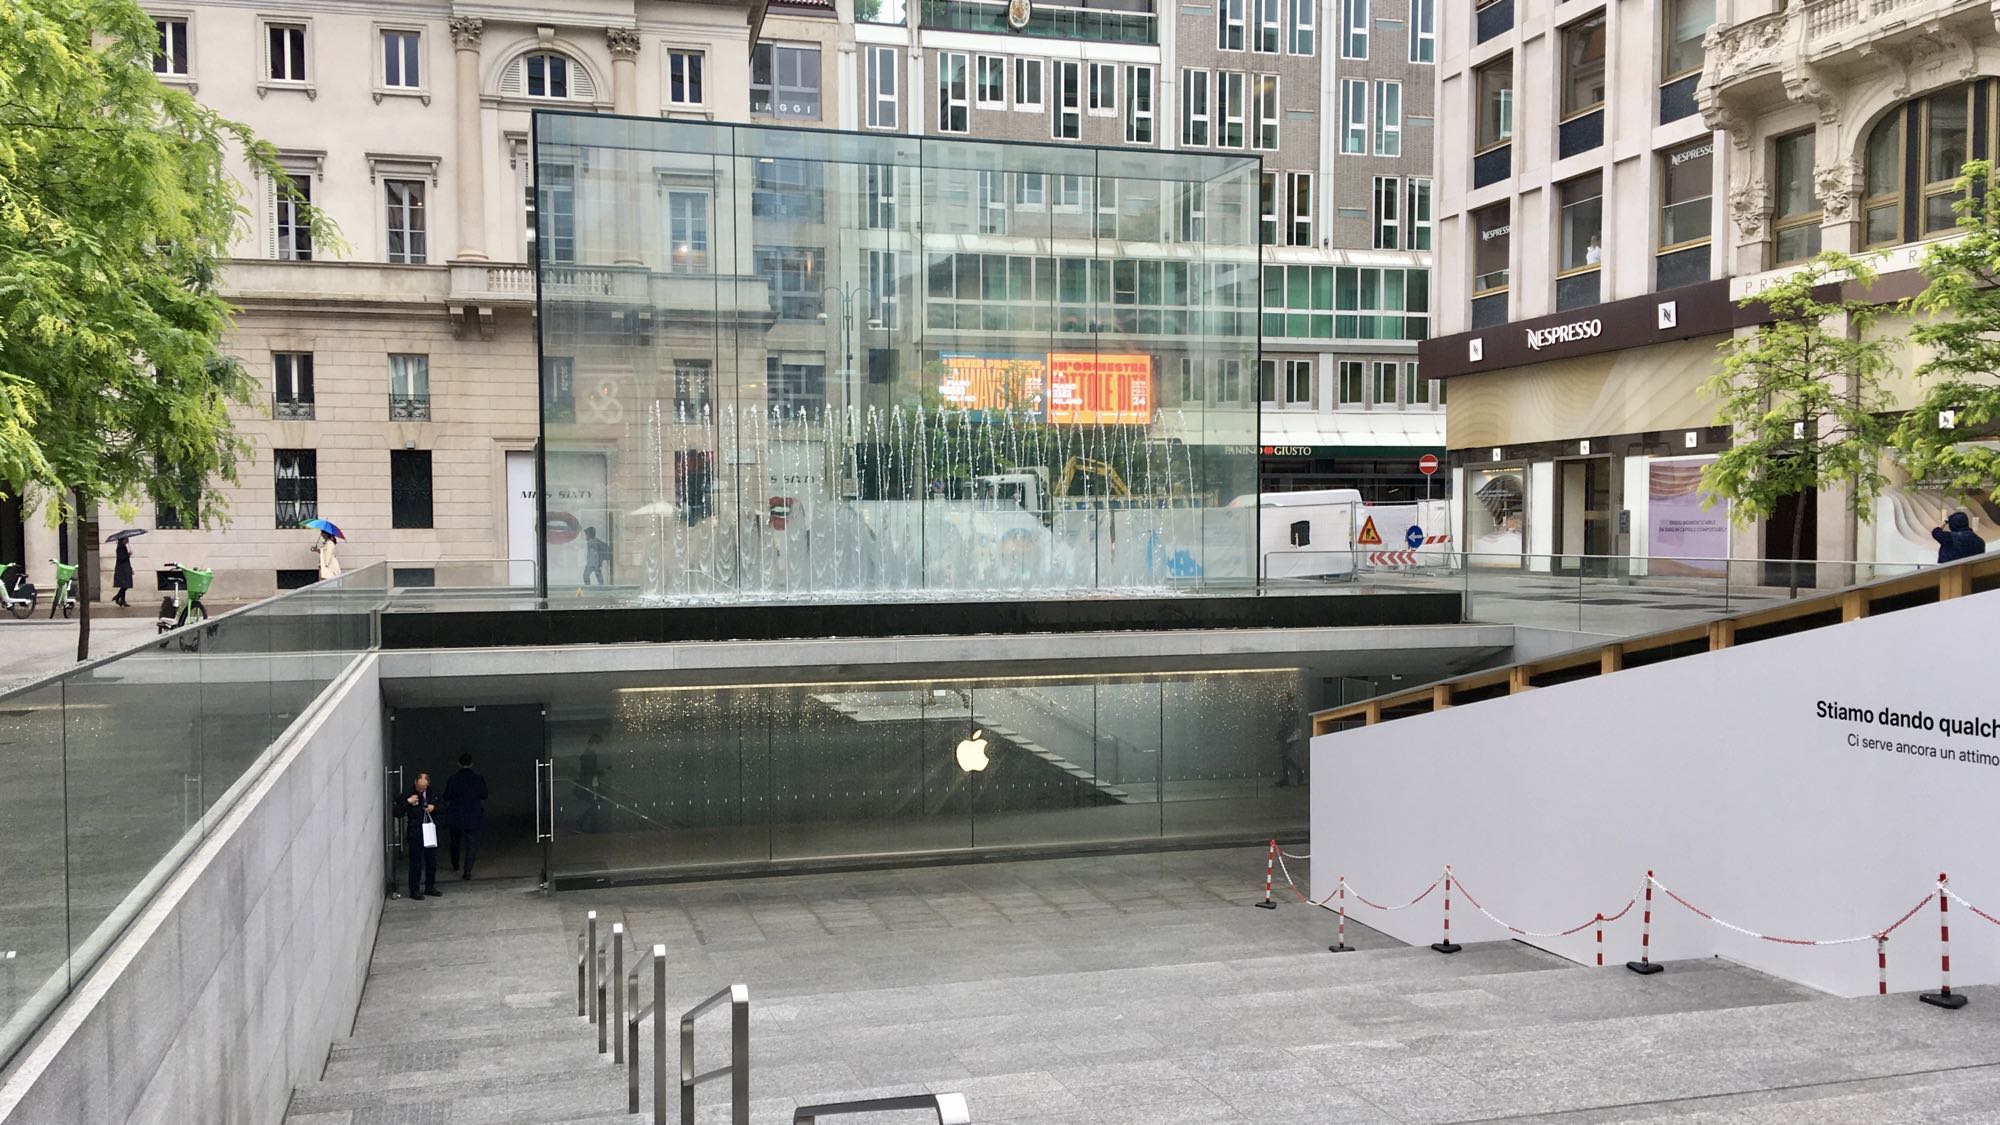 Photo of steps in a city square that form the roof of the Apple store